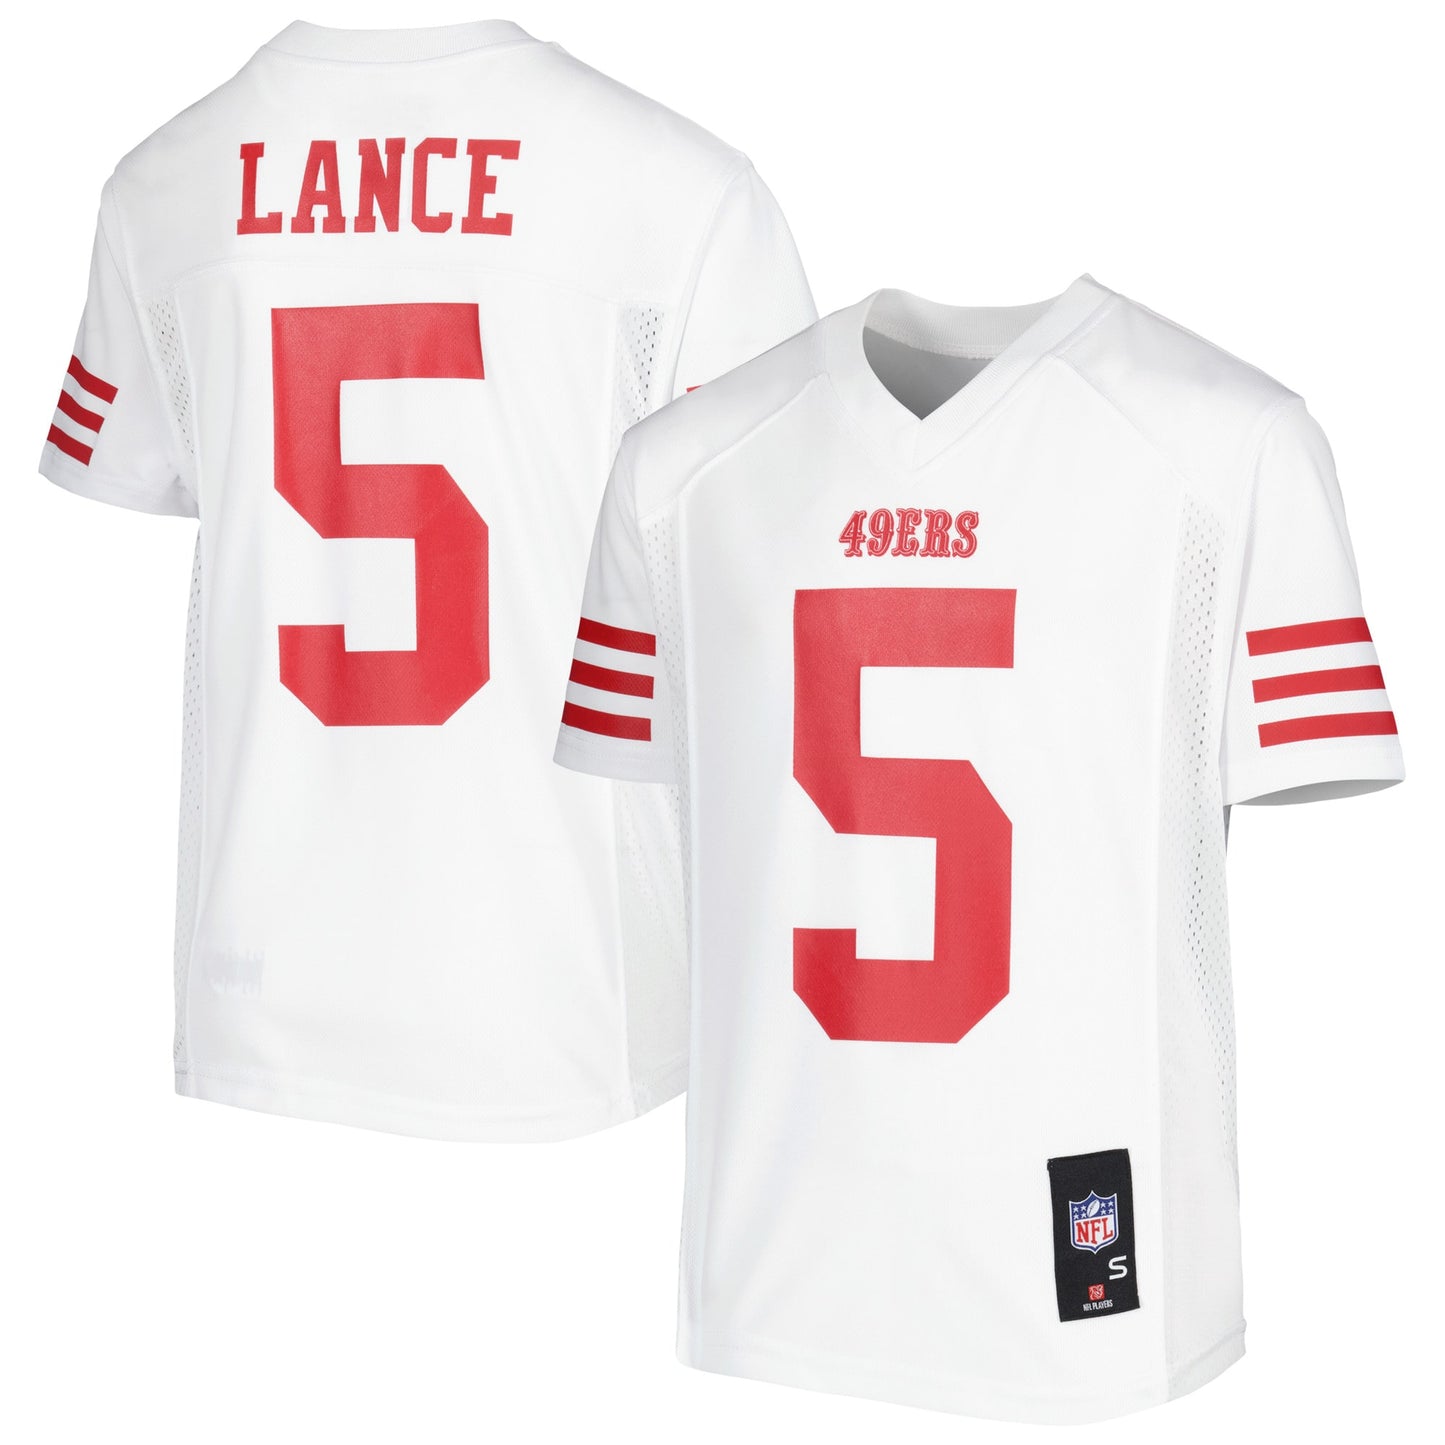 Trey Lance San Francisco 49ers Youth Team Replica Player Jersey - White